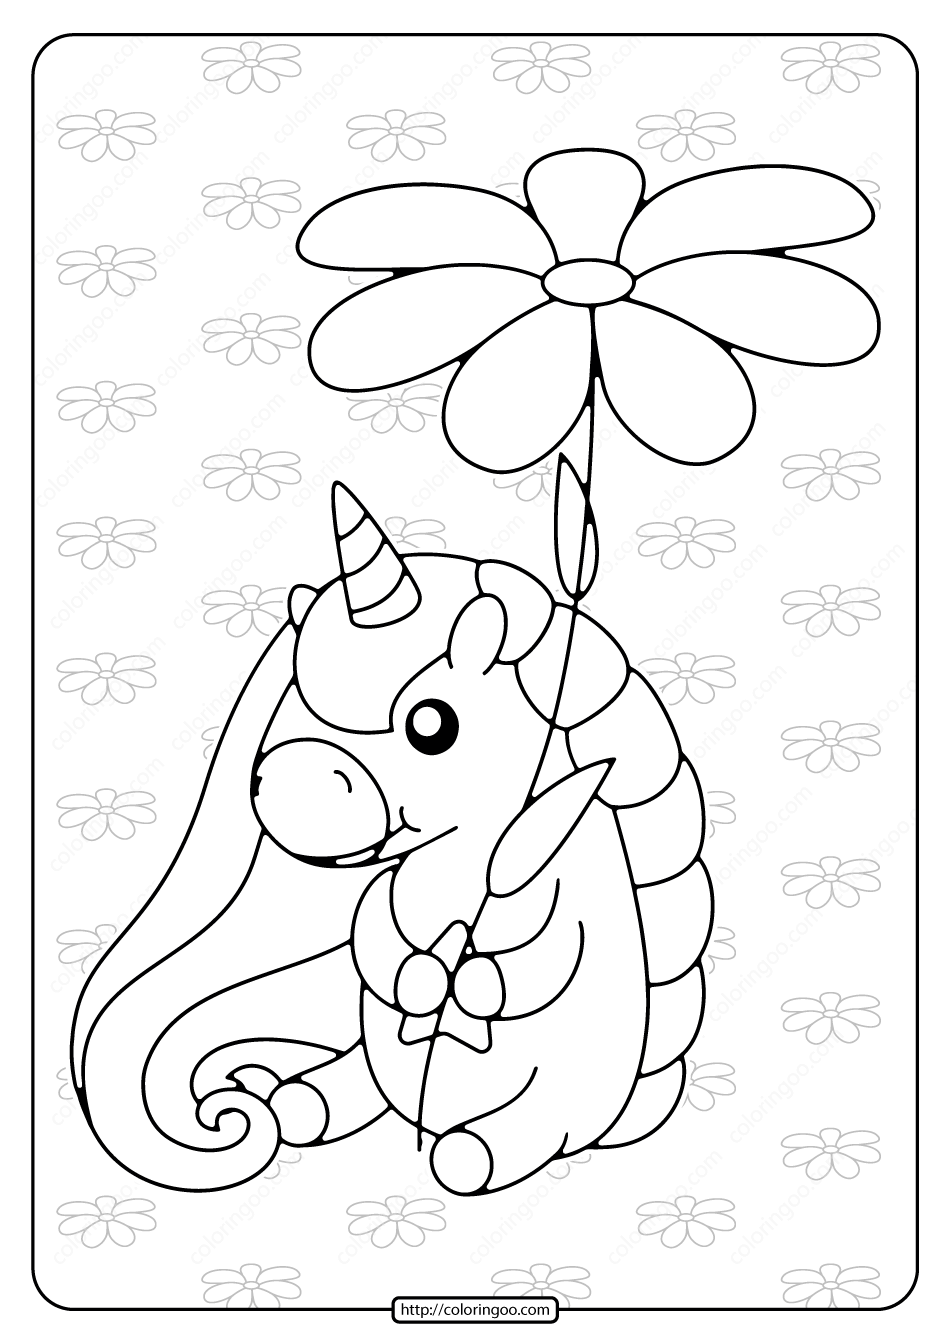 Printable Unicorn Holding a Flower Coloring Page